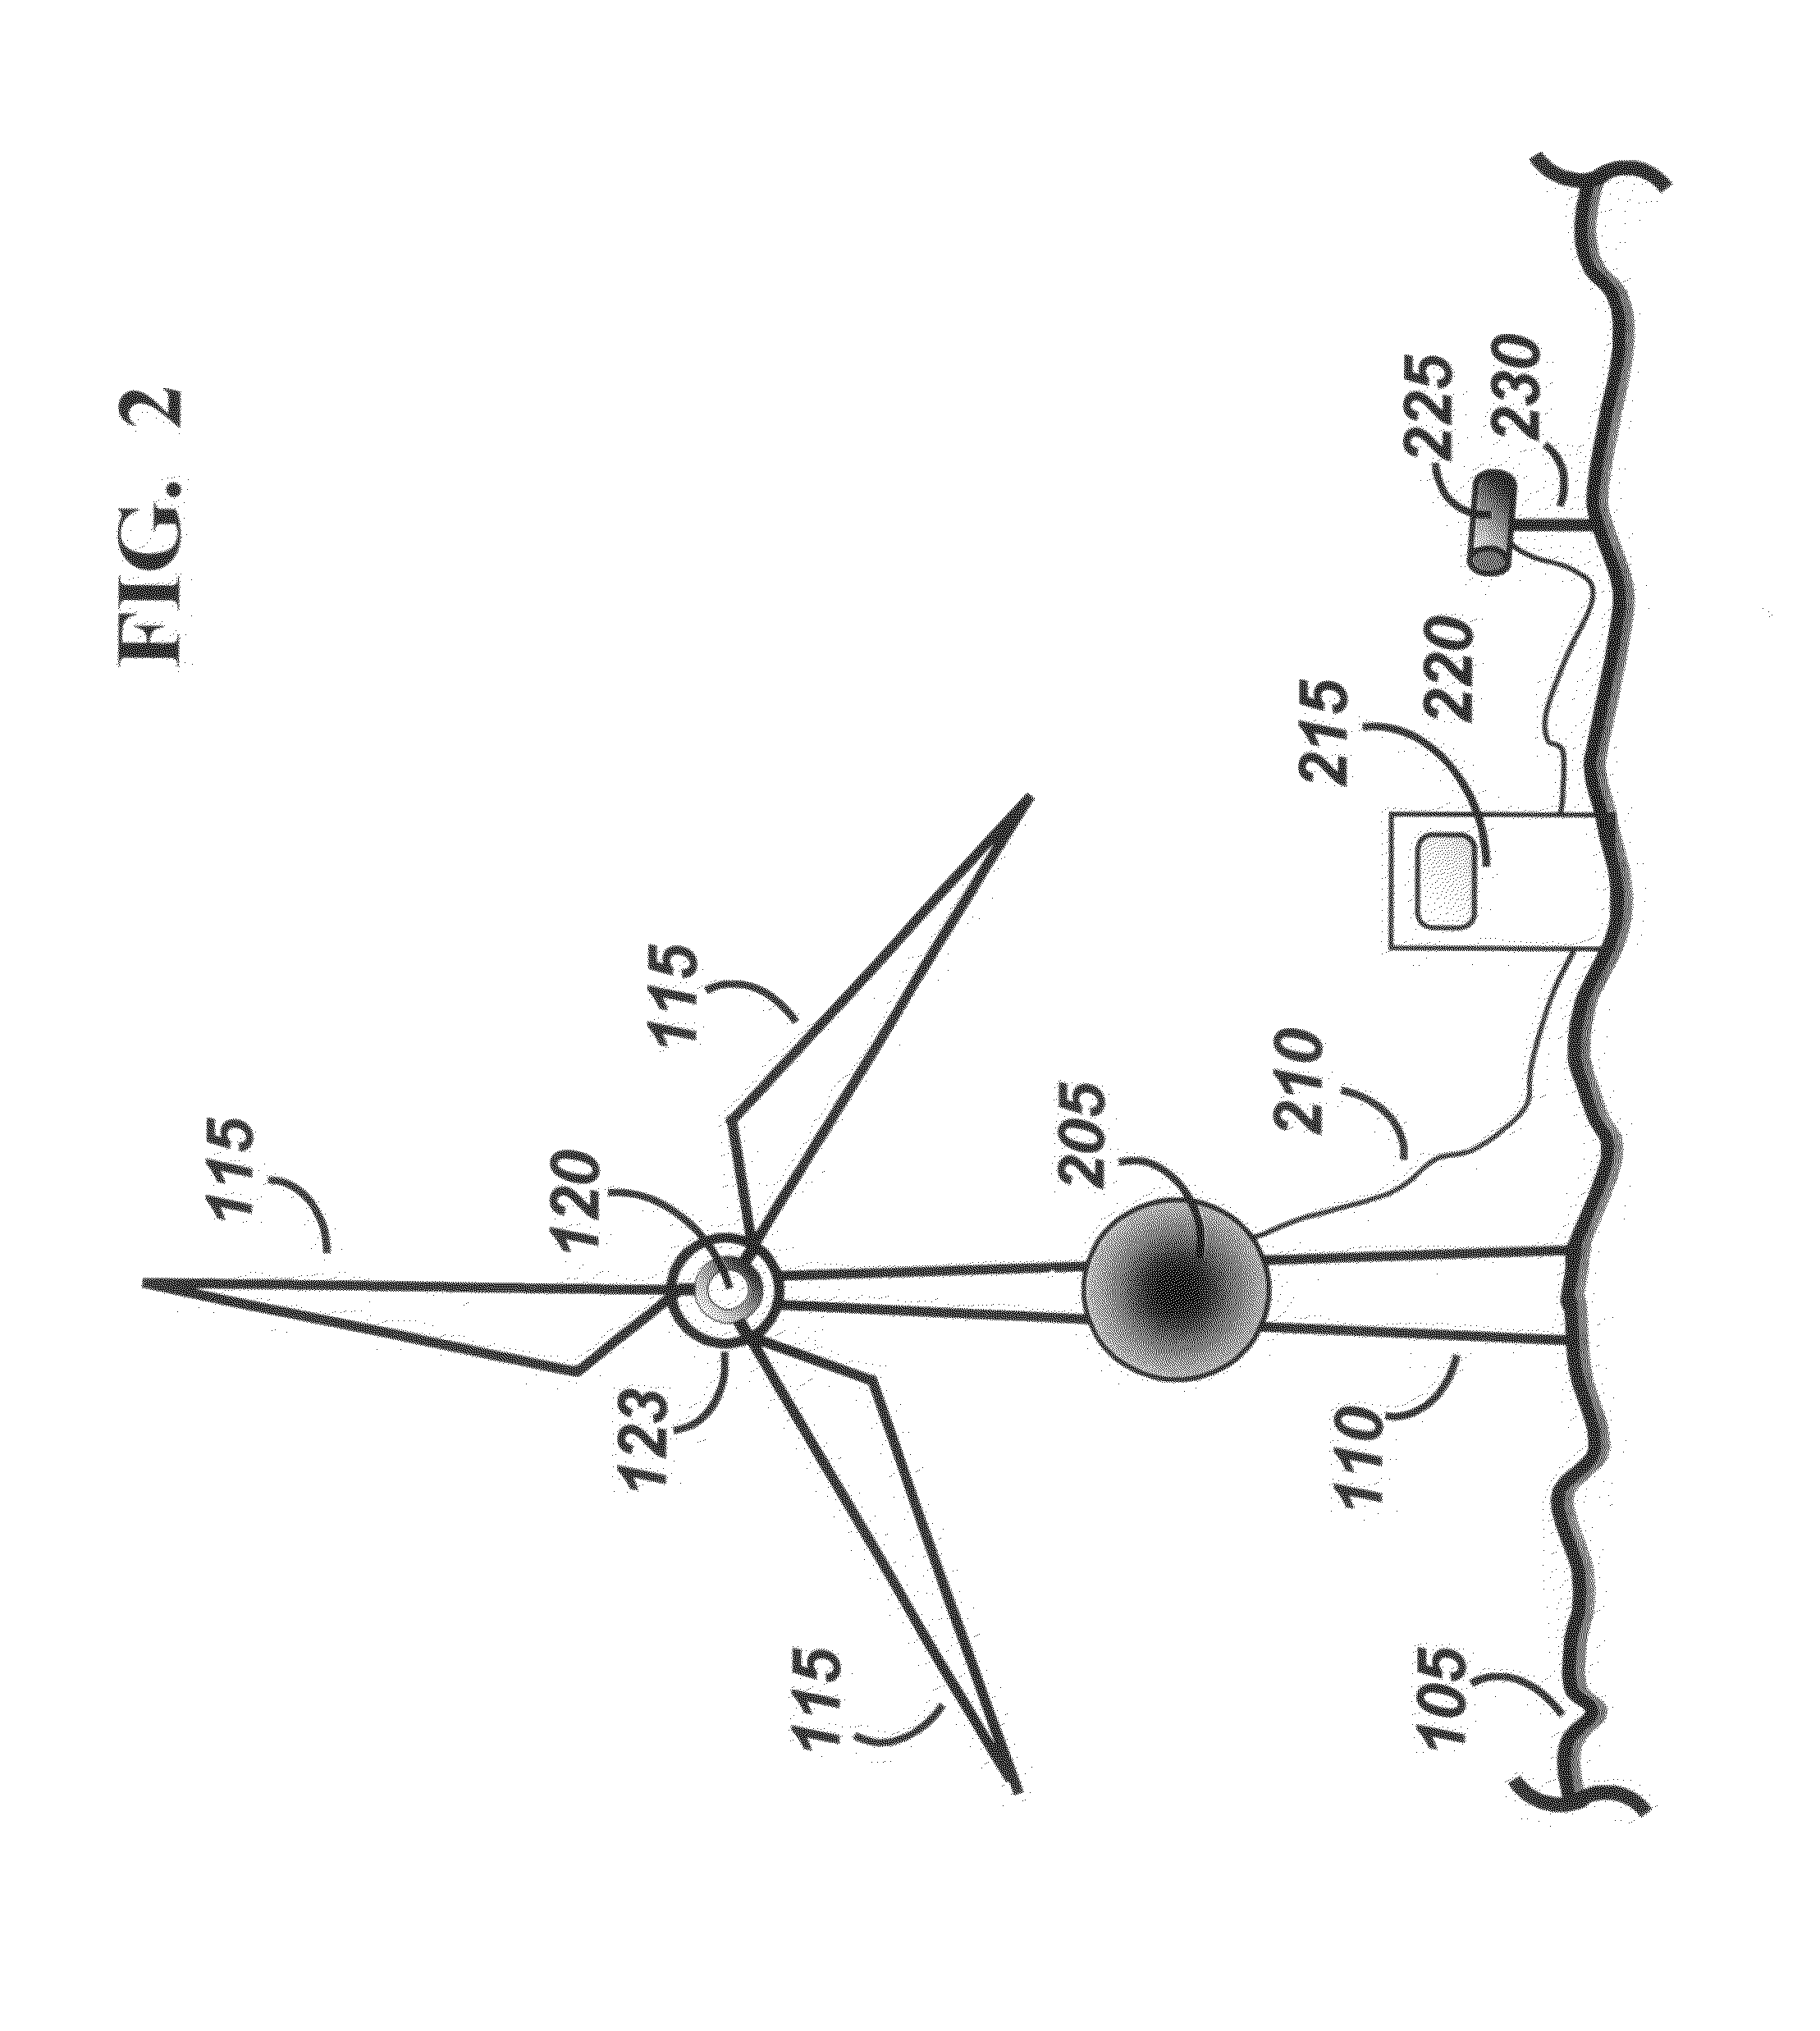 Method and apparatus using illumination system for actively reducing the environmental impact of wind turbine power units